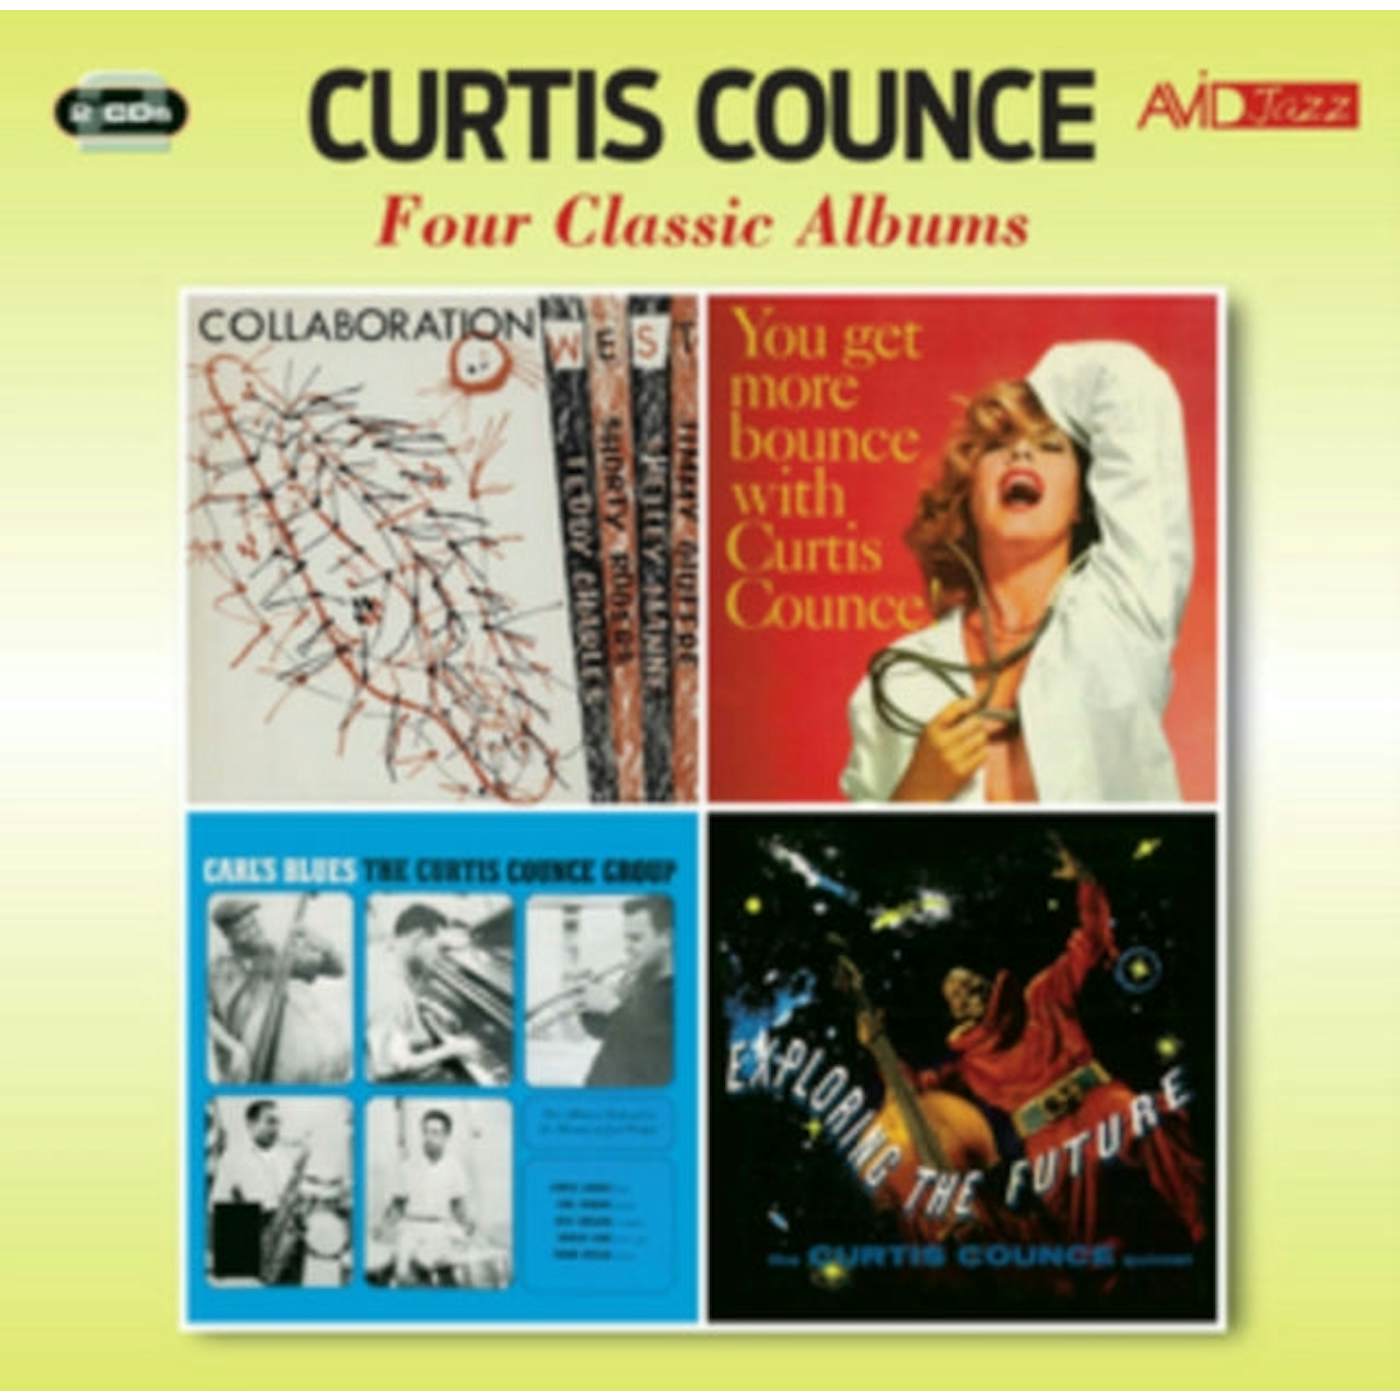 Curtis Counce CD - Four Classic Albums